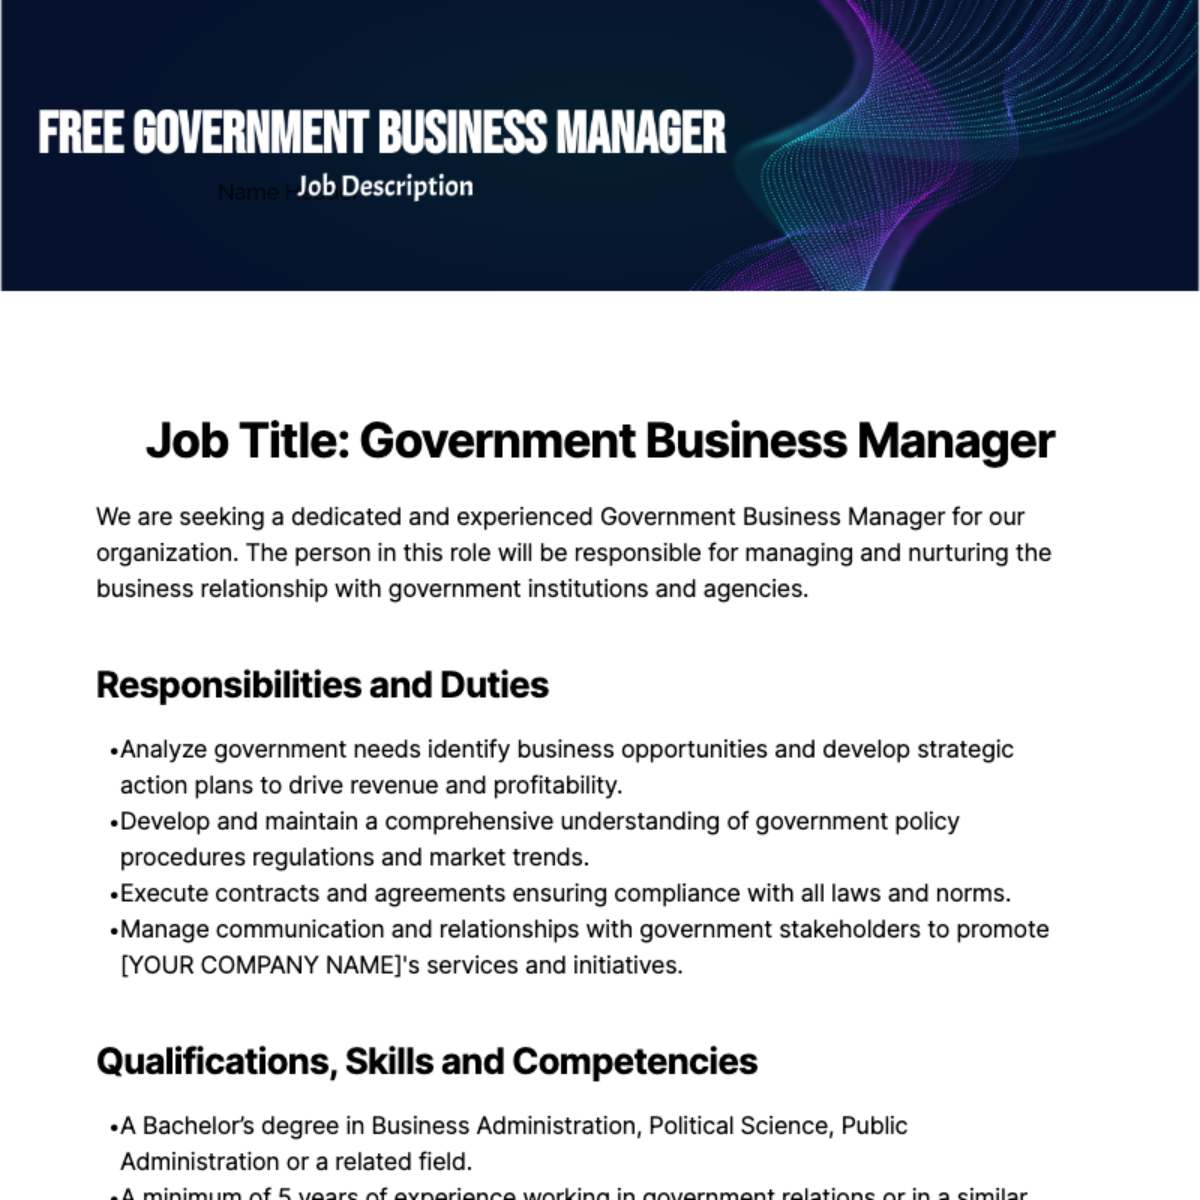 Free Government Business Manager Job Description Template